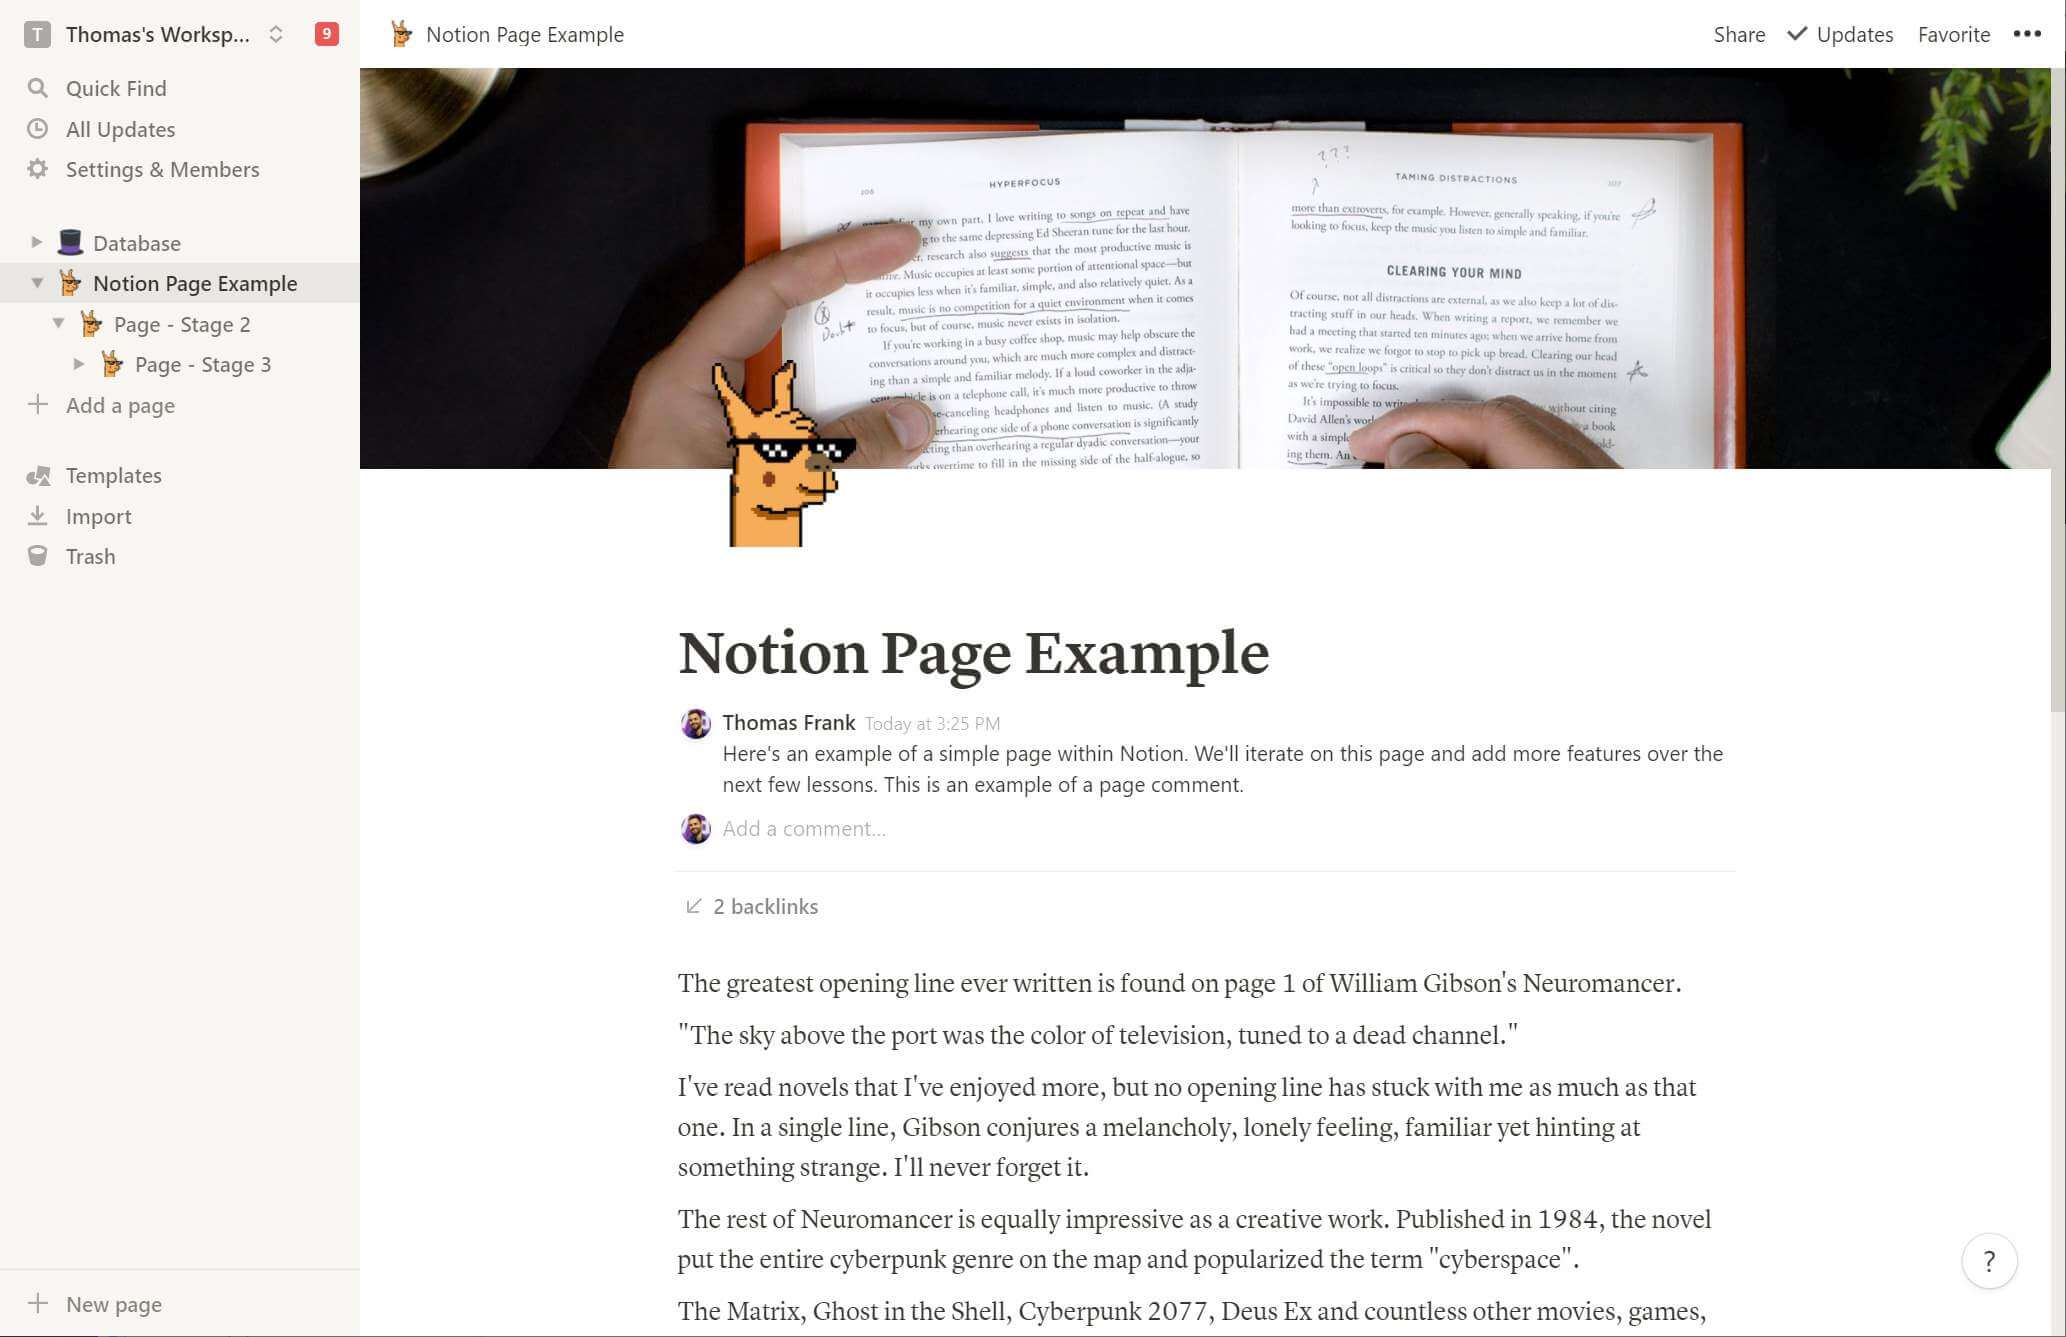 how-to-create-and-edit-notion-pages-notion-fundamentals